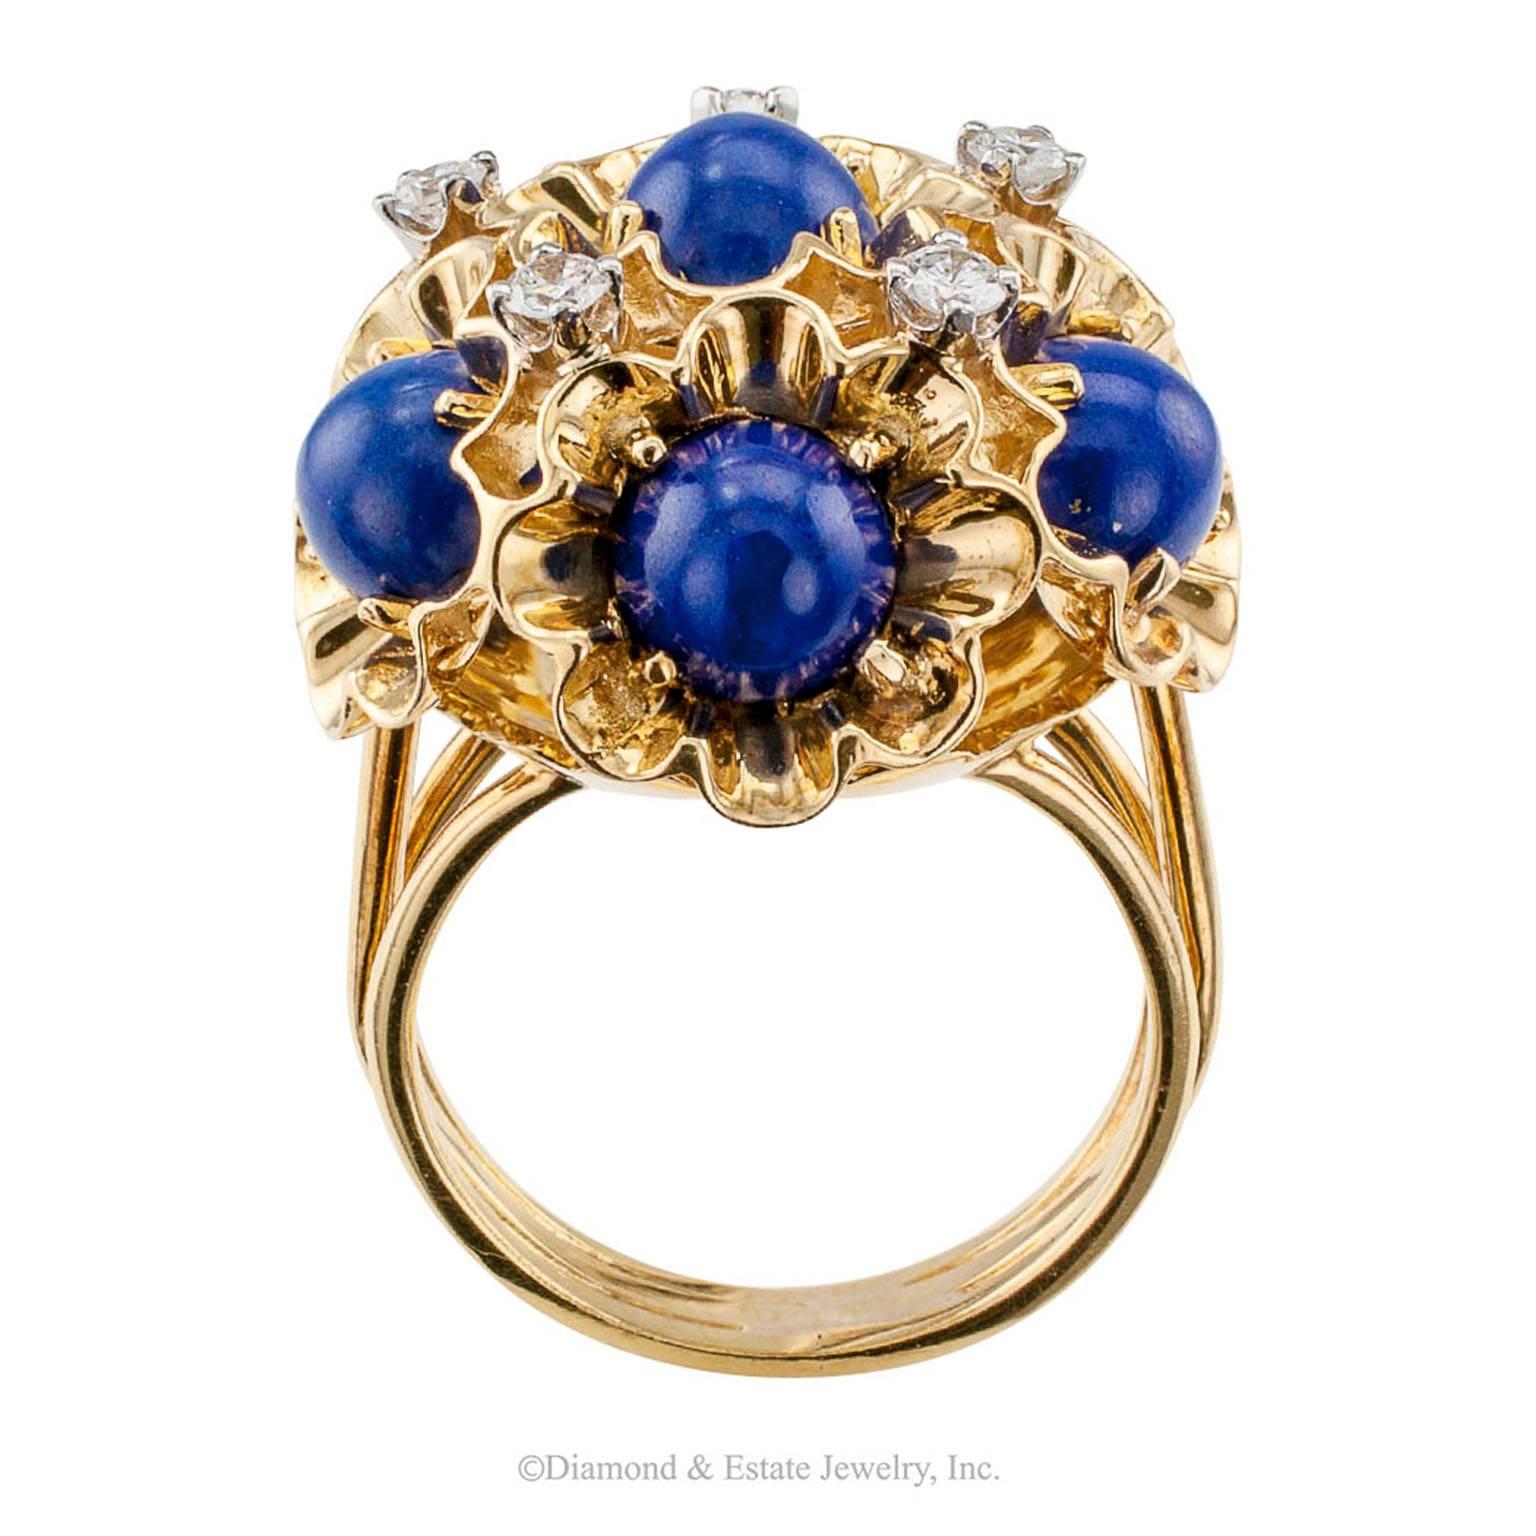 Dankner Lapis Lazuli Diamond Domed Gold Ring

Dankner lapis lazuli and diamond domed cluster ring mounted in 18-karat yellow gold circa 1970.  Designed as a uniform bouquet formed by six individual flowers with five evenly spaced diamonds in